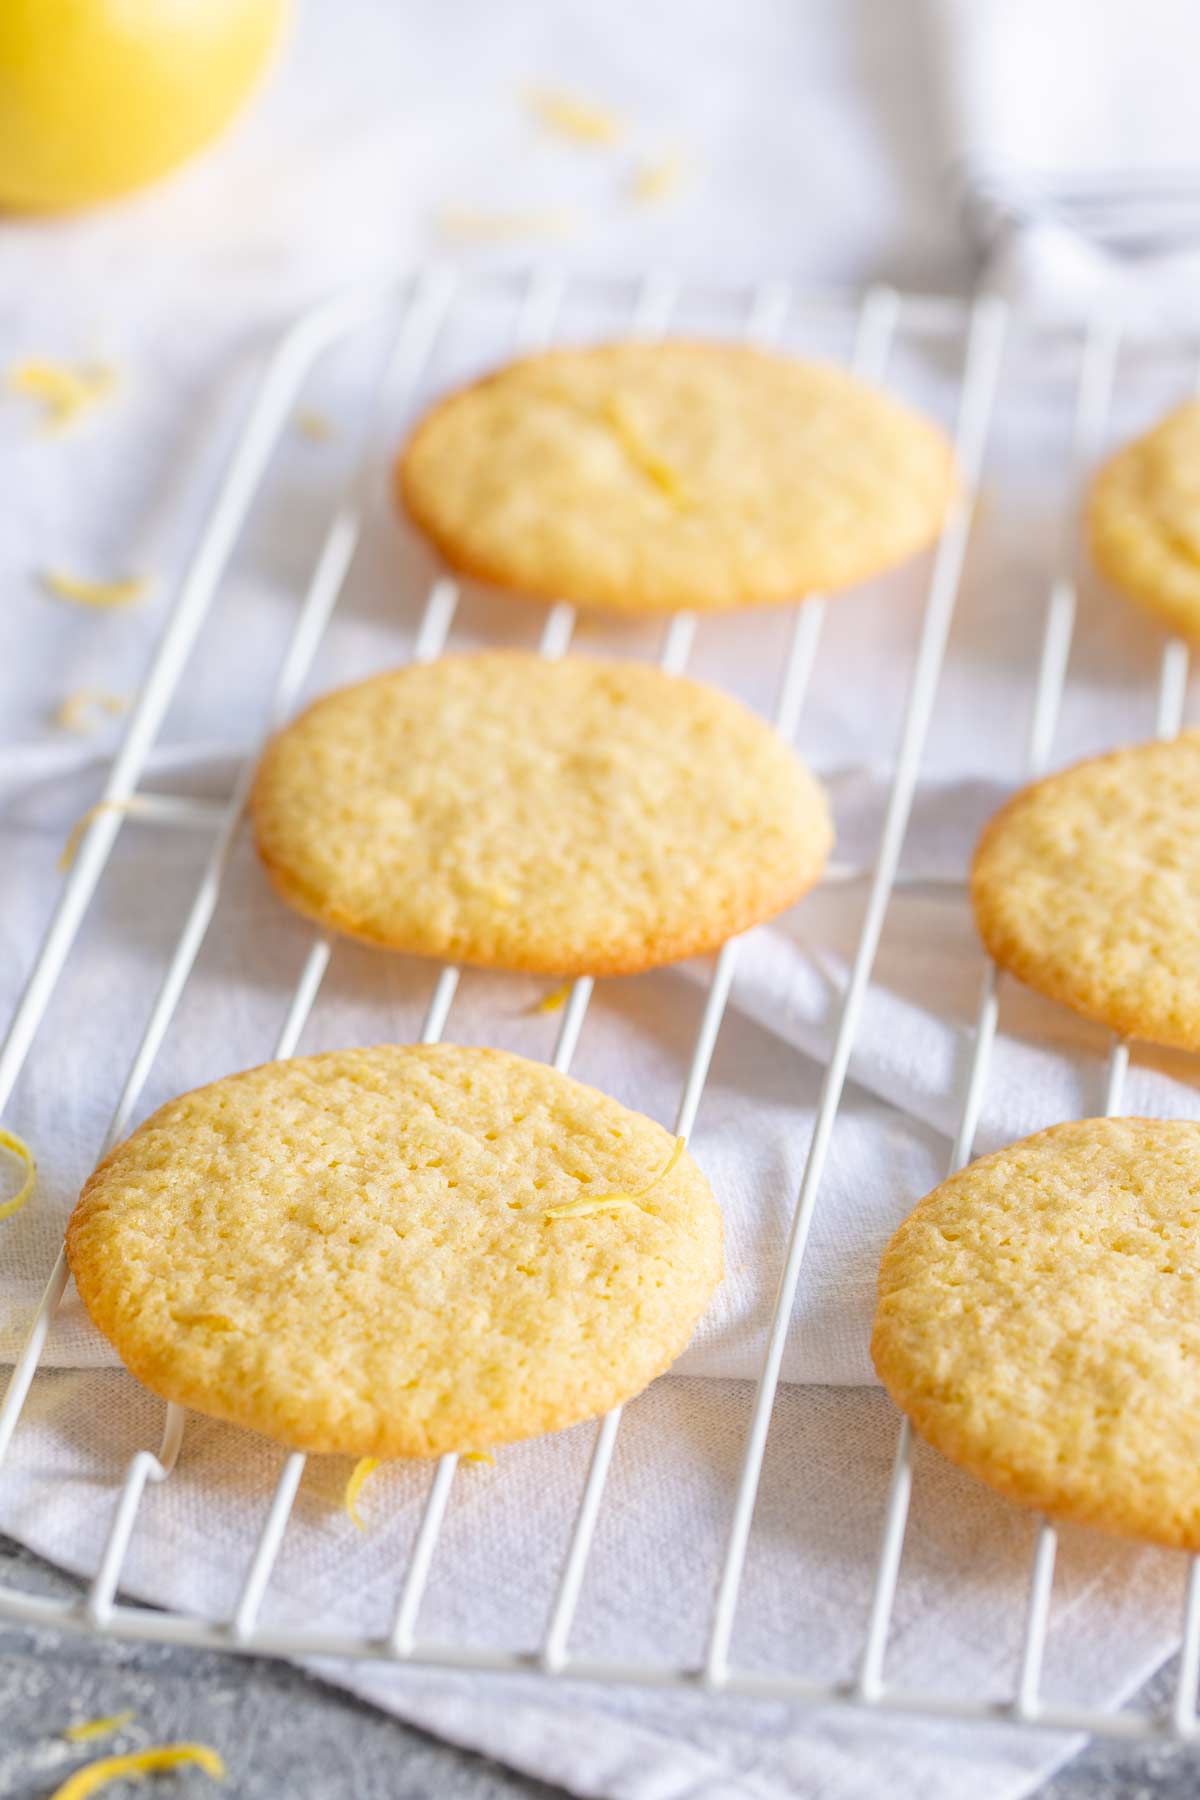 lemon wafer cookies cooling a a white wire rack